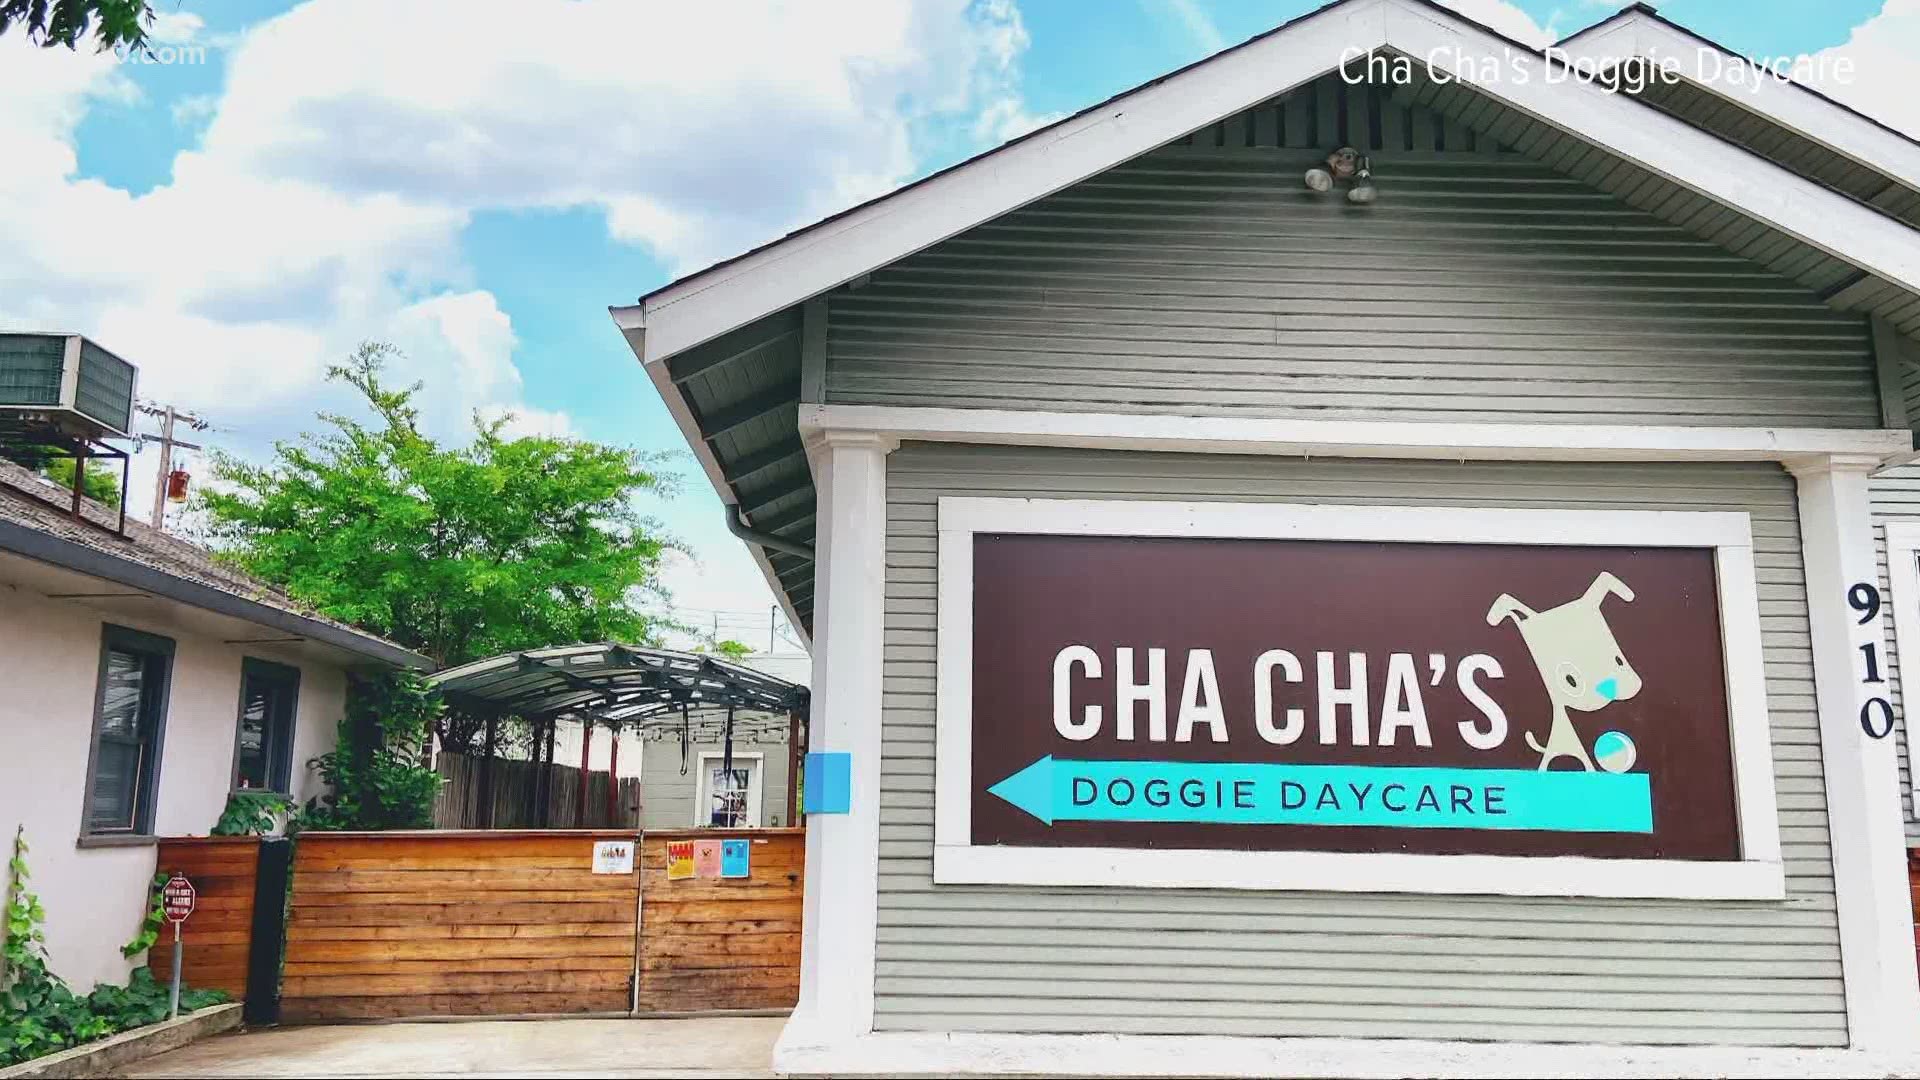 Cha Cha's, an East Sacramento doggie daycare, is one of four small local businesses that received Comcast's assistance.